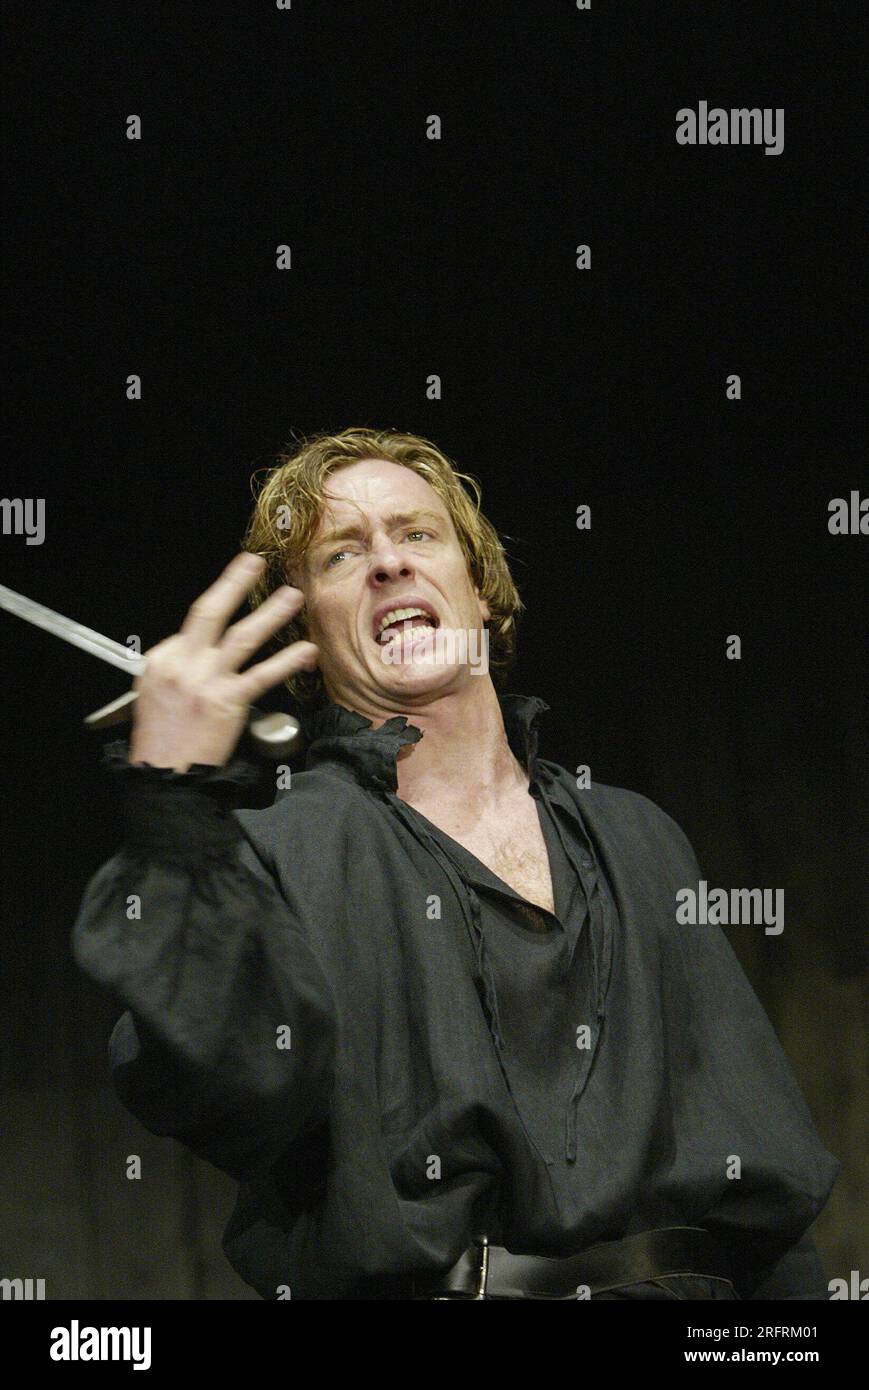 TOBY STEPHENS INTERVIEWED BY THE TIMES - Hampstead Theatre